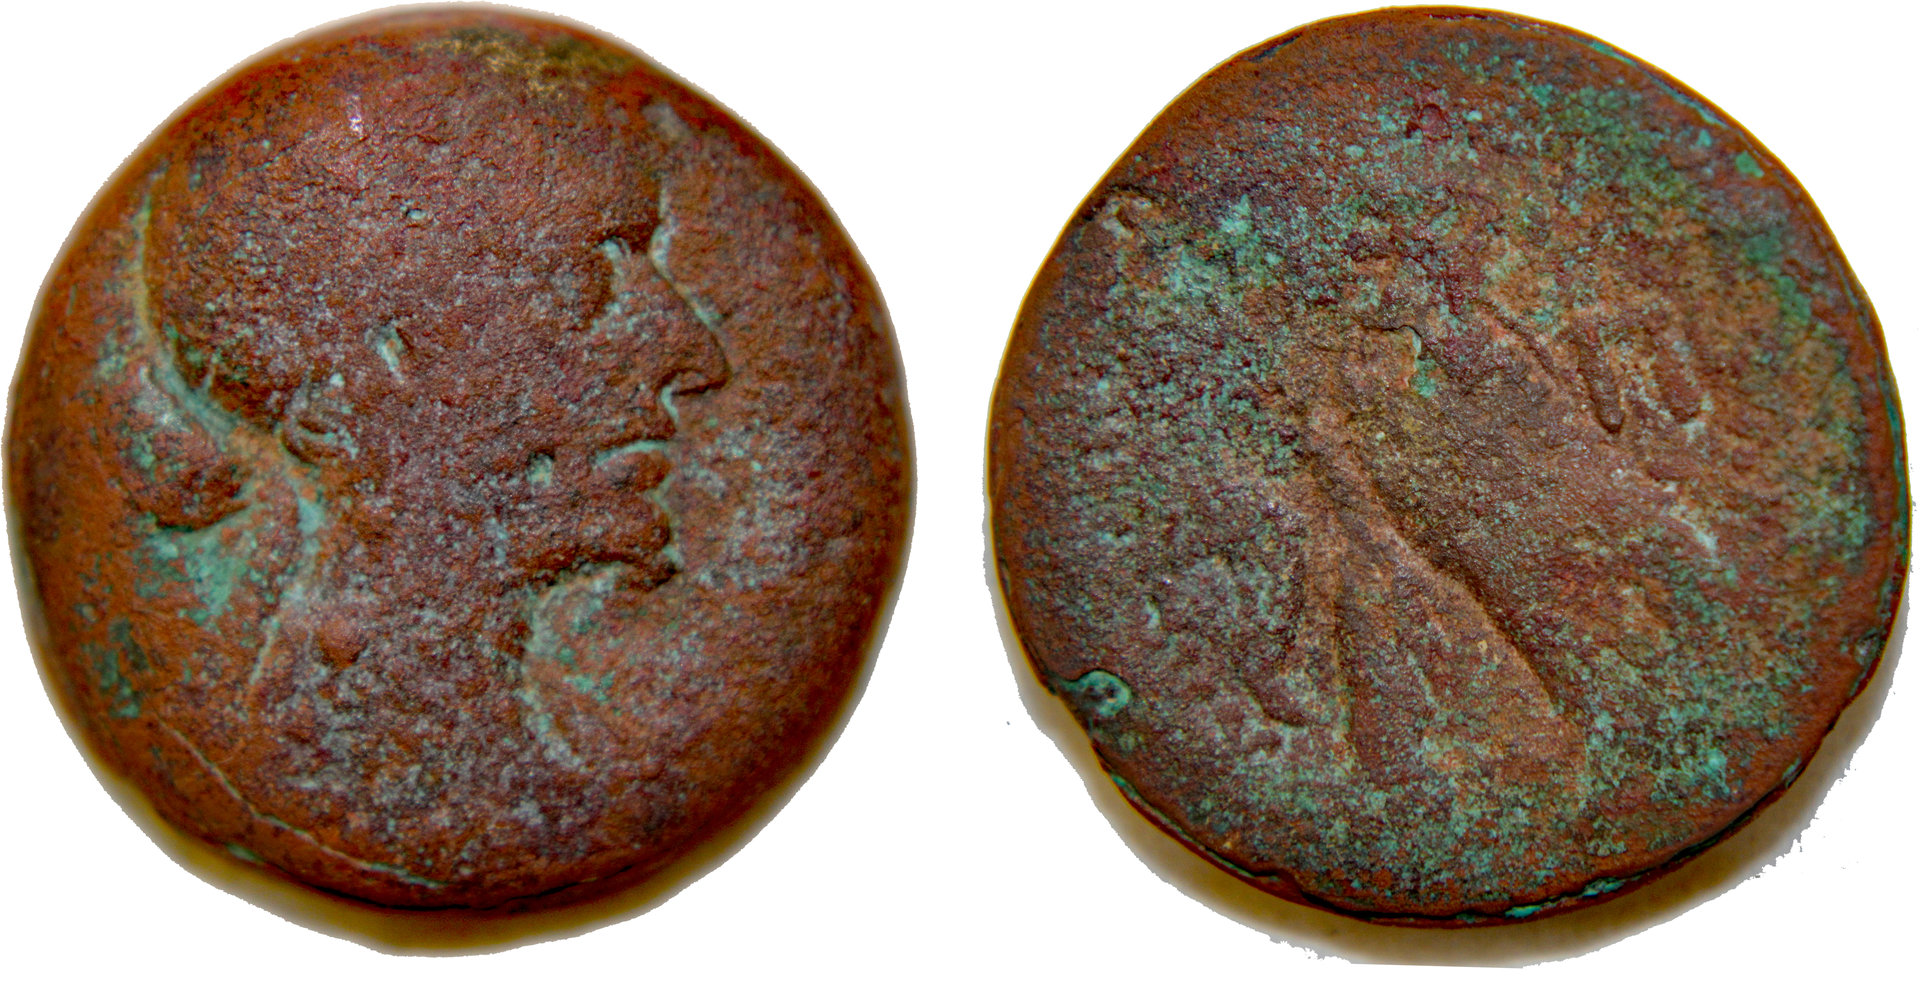 D-Camera Cleopatra VII, 80 Drachma, After cleaning.1, 6-25-20.jpg